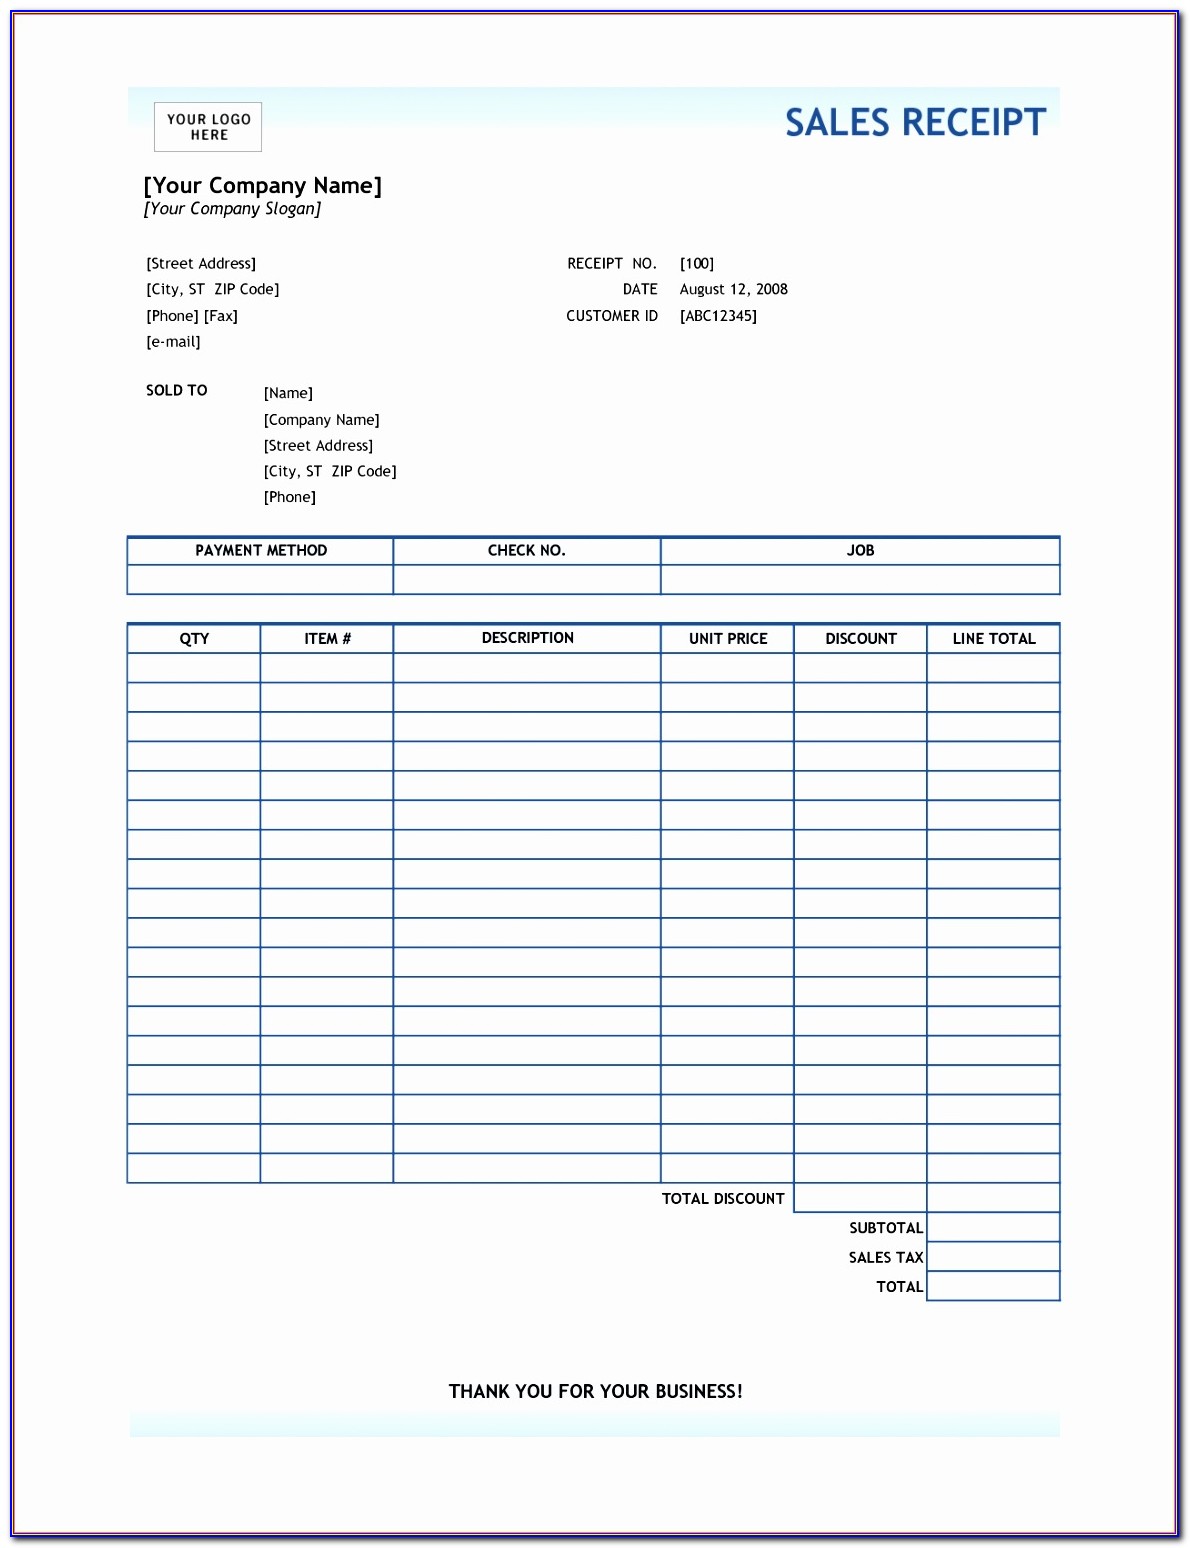 Excel Template For Sales Receipt